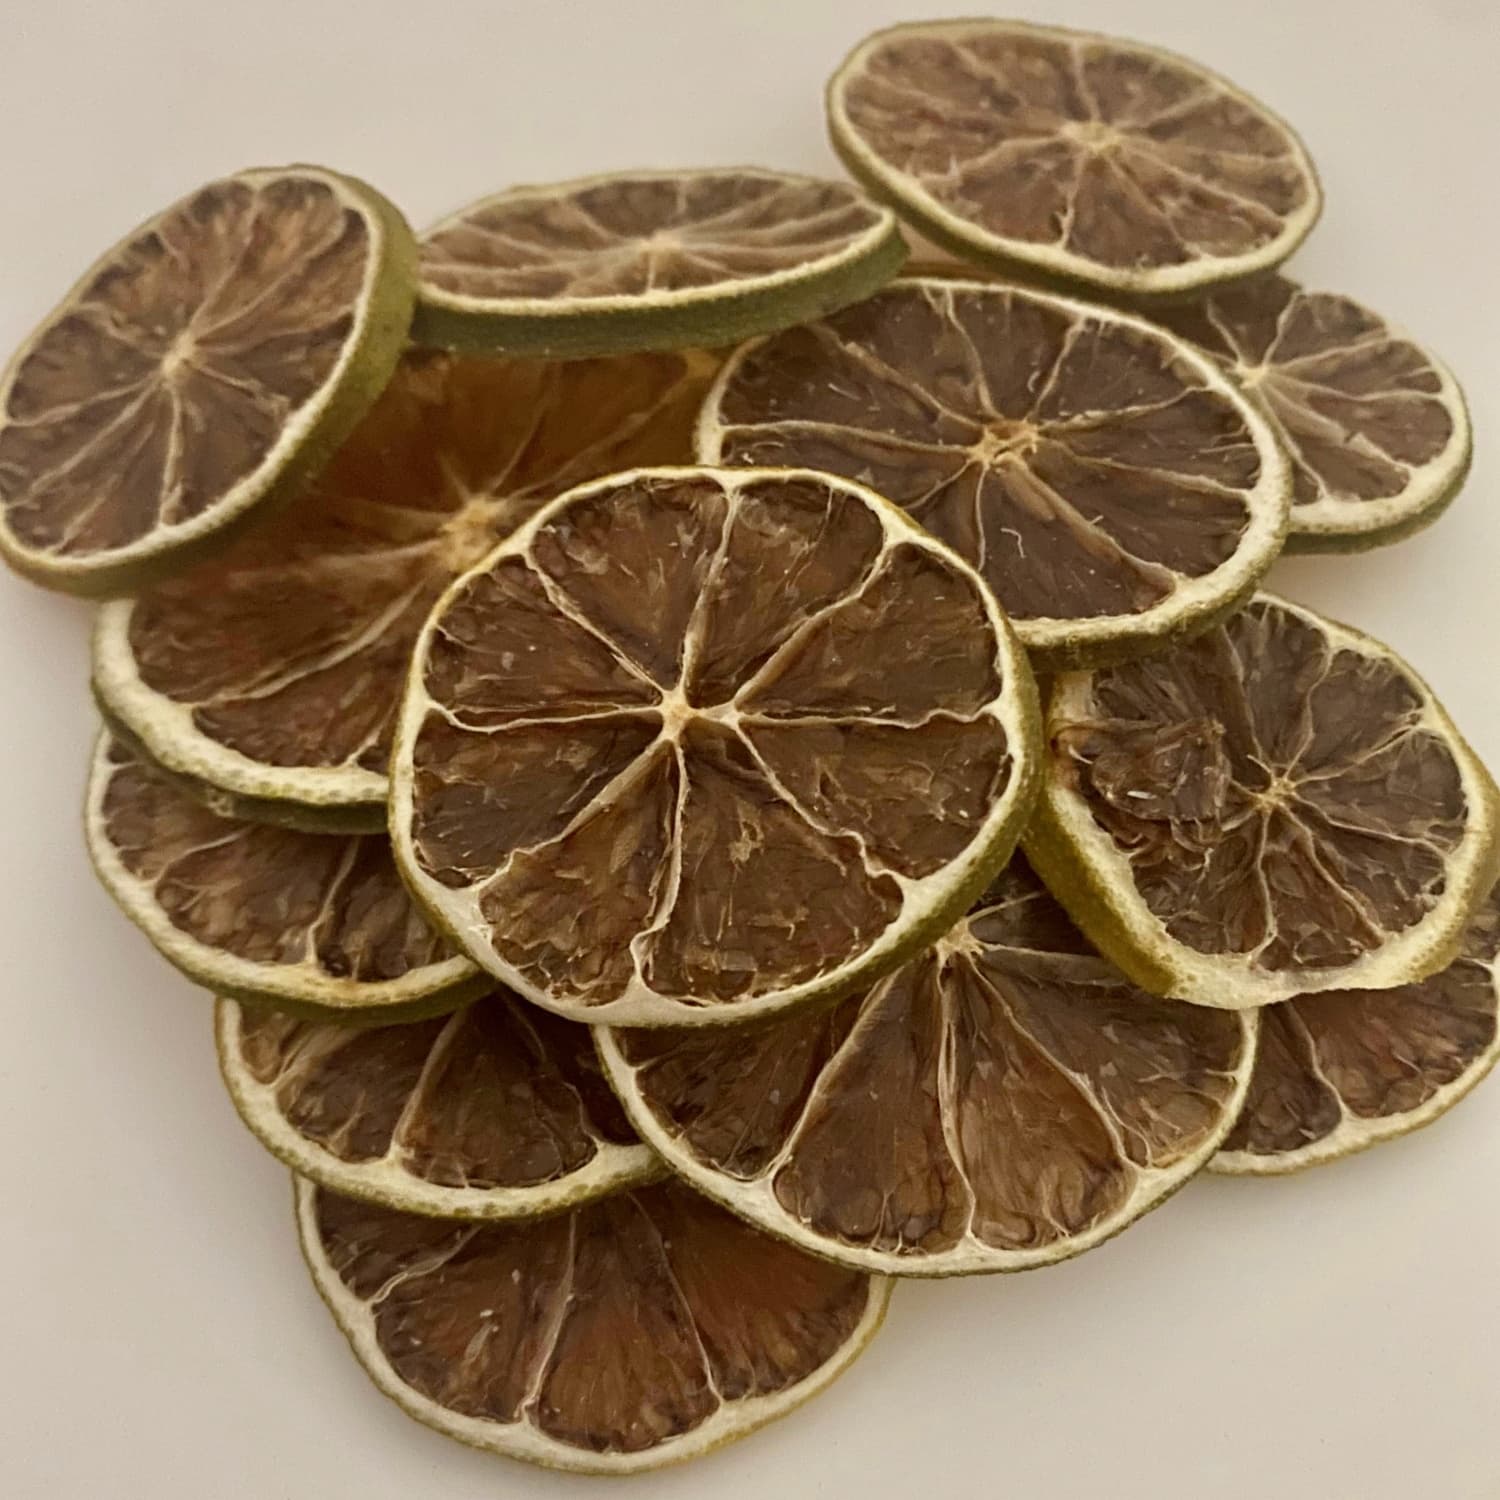 Vietnamese dried lime sliced high quality for food and beverage_Dried lemon tea fruit cheap price